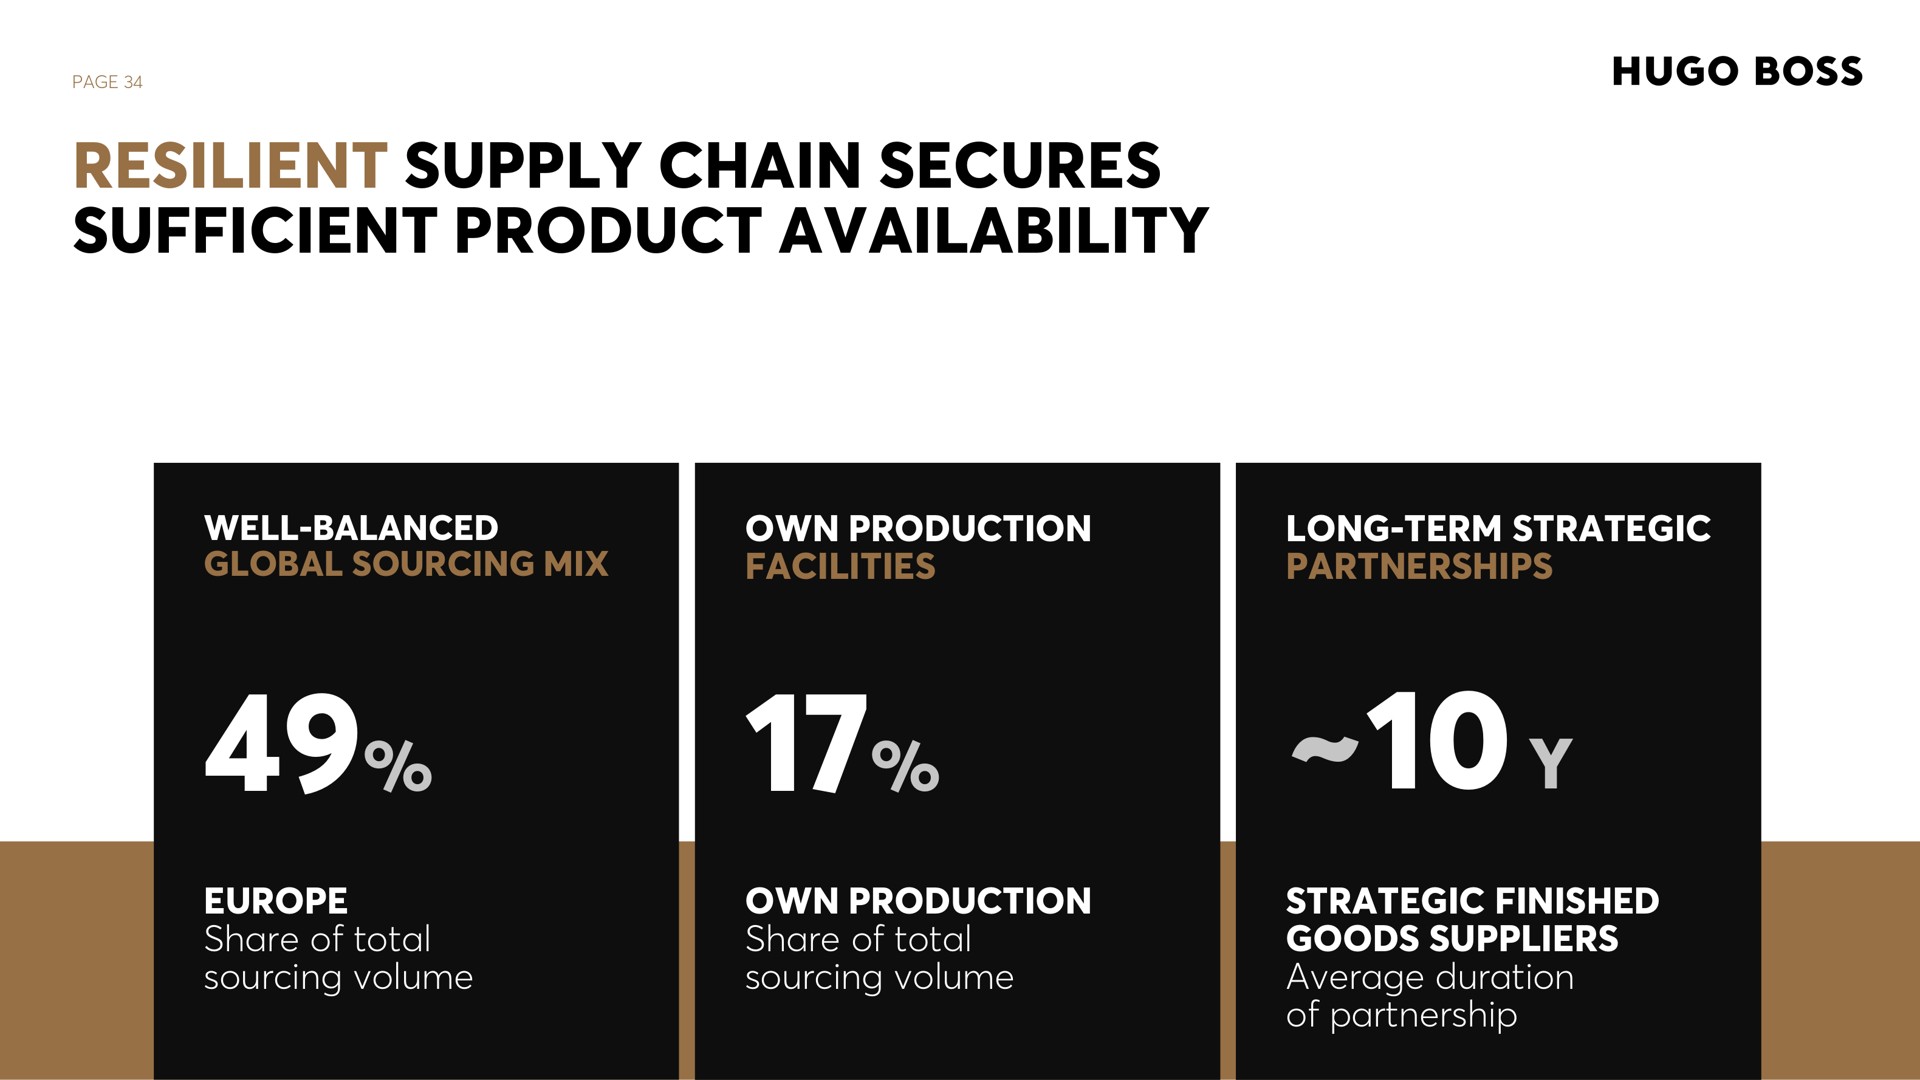 page resilient supply chain secures sufficient product availability well balanced global sourcing mix own production facilities long term strategic partnerships share of total sourcing volume own production share of total sourcing volume strategic finished goods suppliers average duration of partnership | Hugo Boss